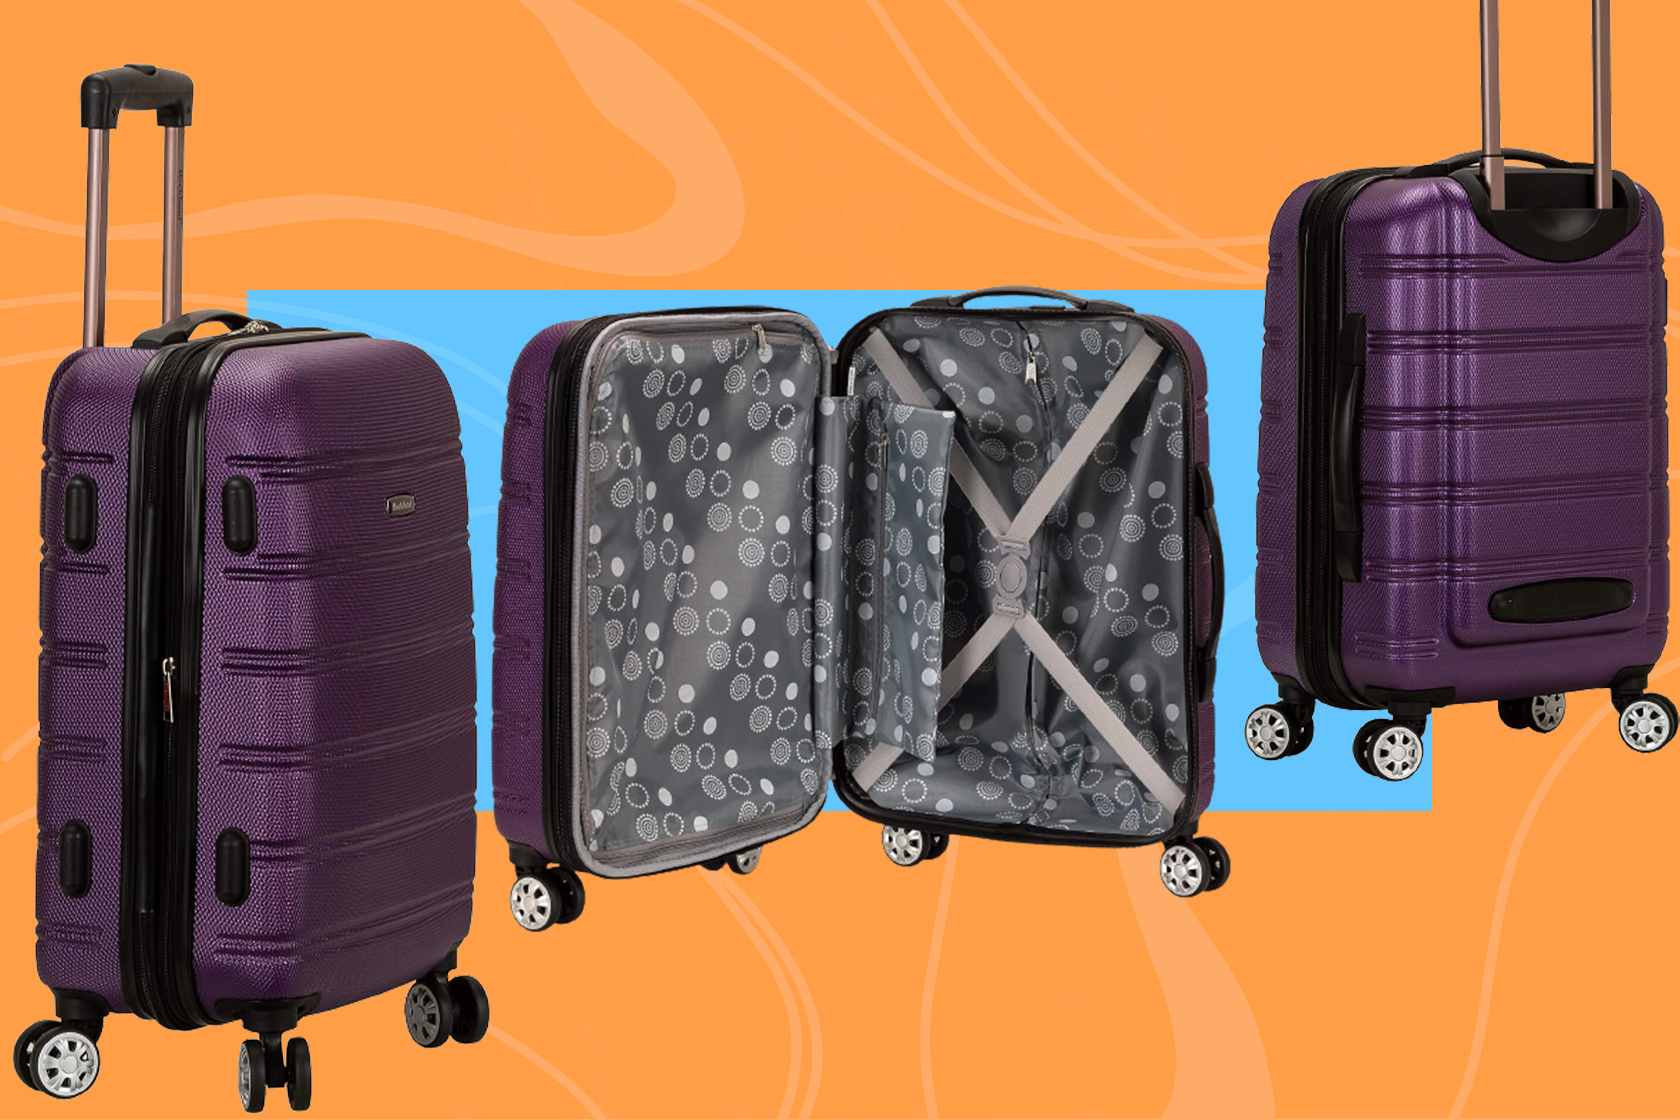 This Rockland carry-on is 73% off for your end-of-summer vacation